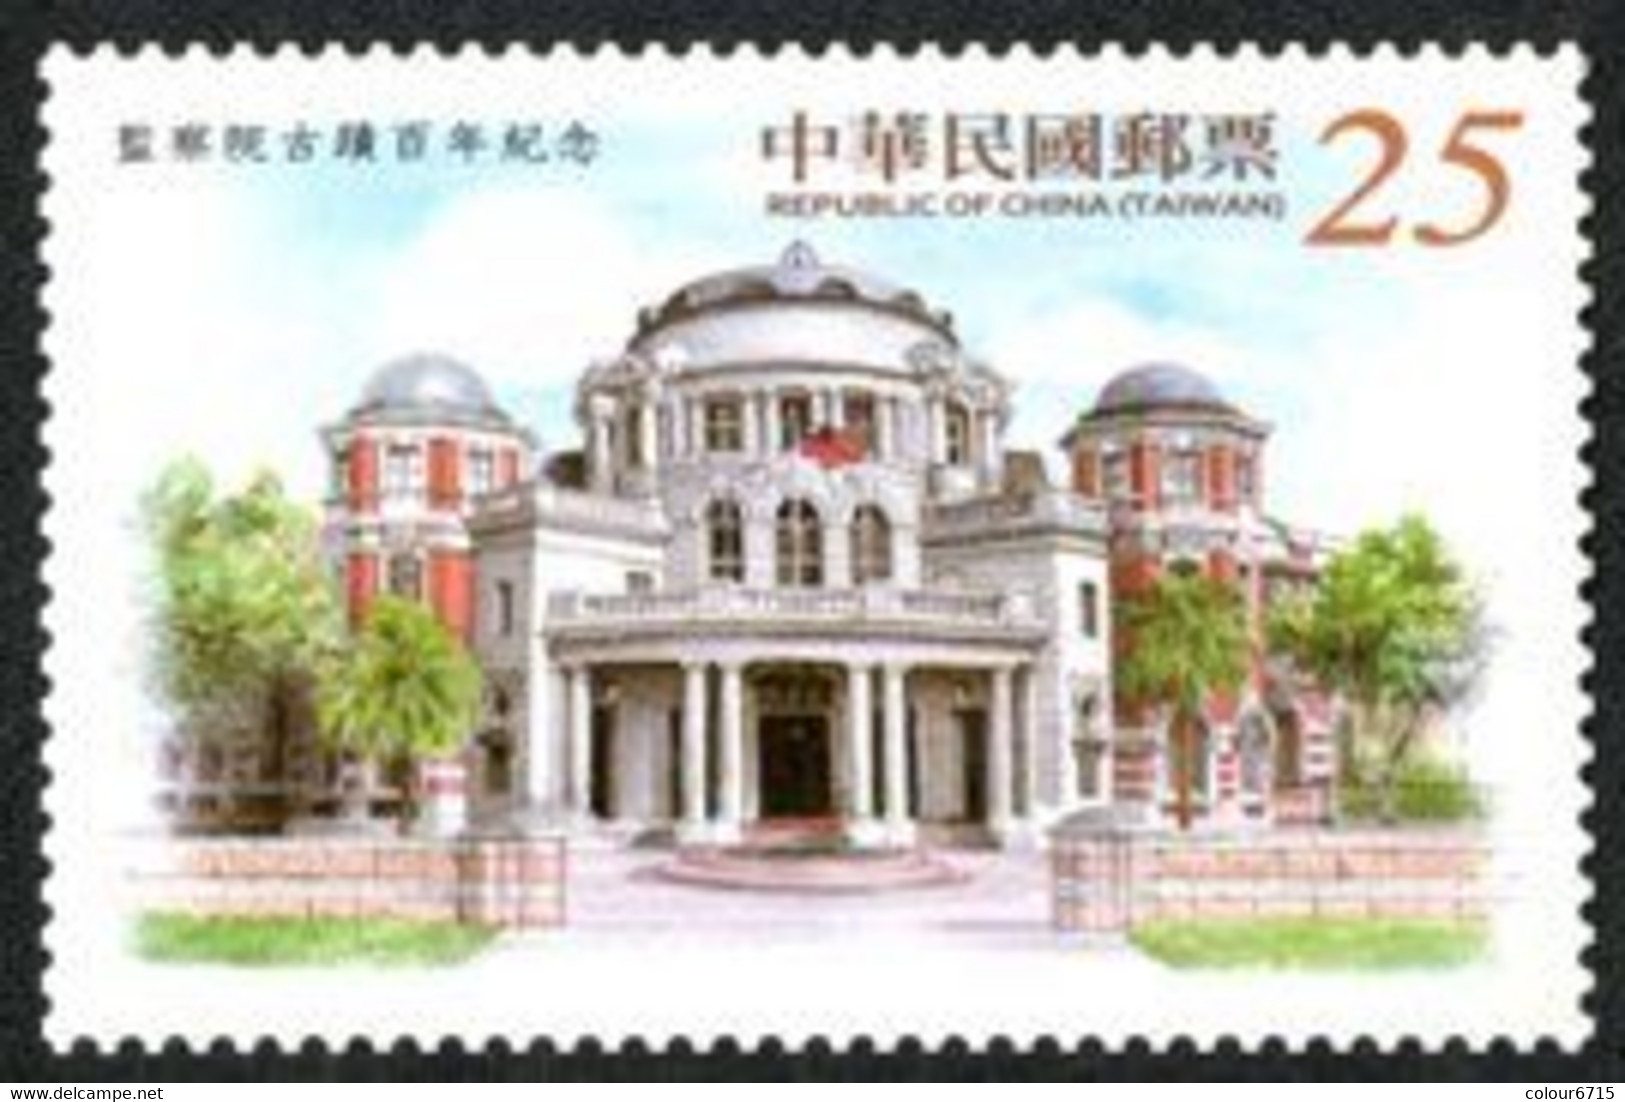 China Taiwan 2015 Control Yuan Building 100th Anniversary Stamp 1v MNH - Unused Stamps